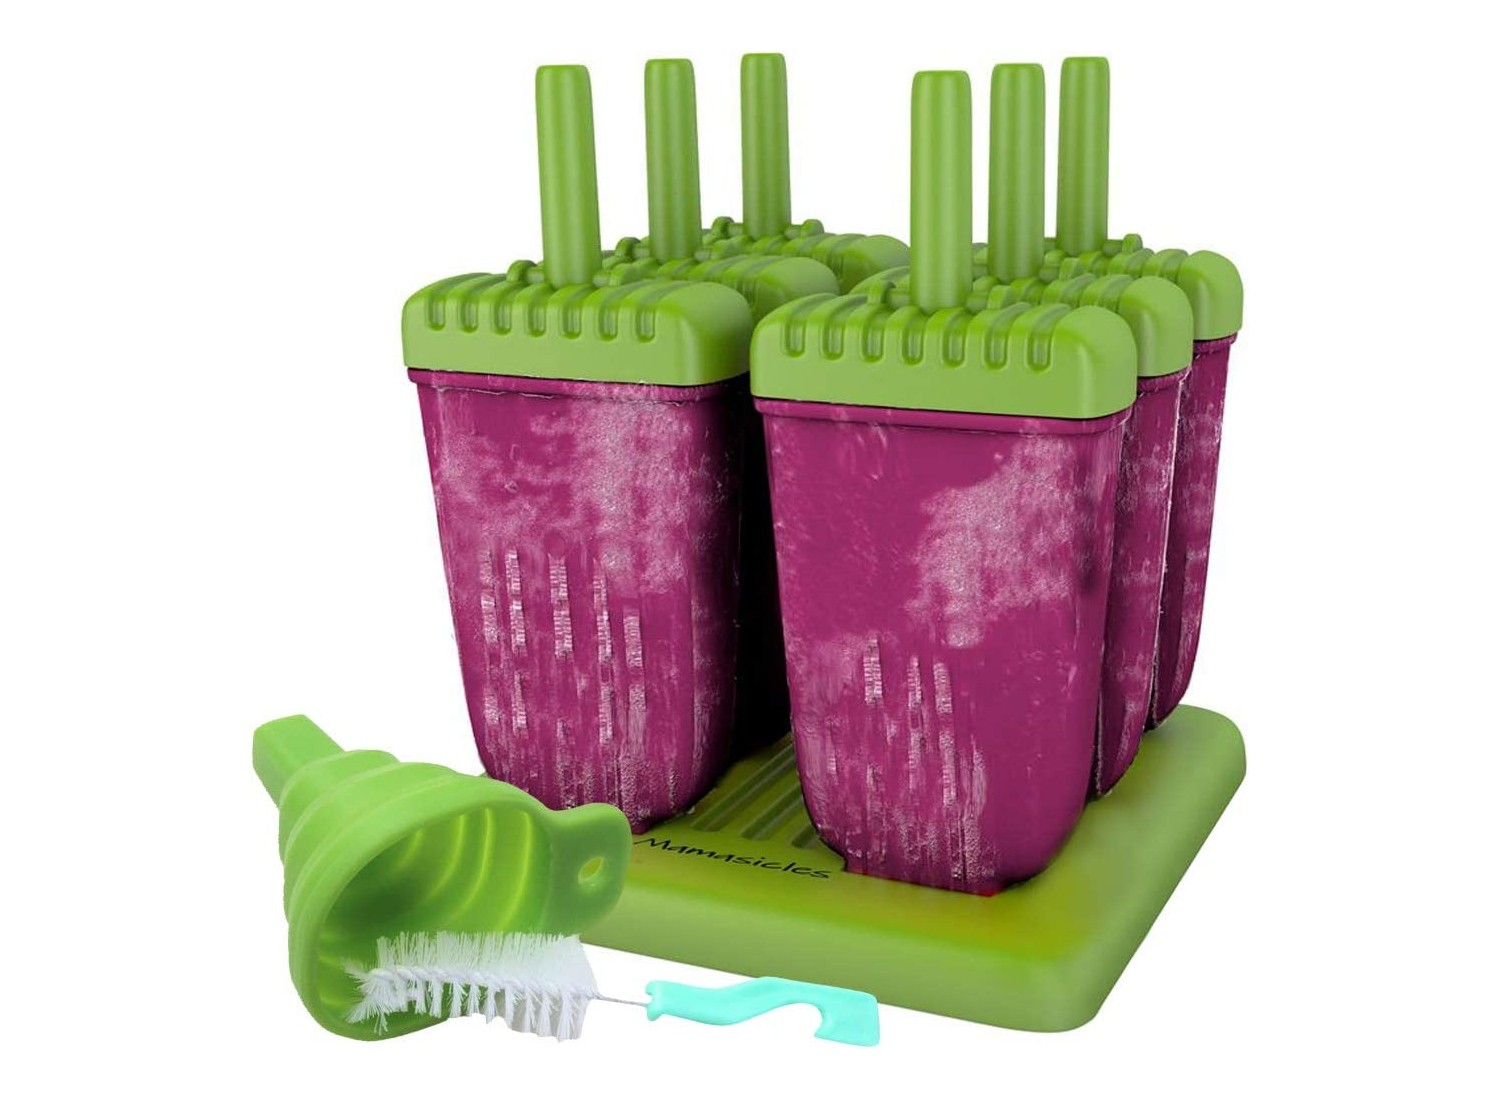 Ice Lolly Pop Mold Popsicle Maker with Straw Makes BPA Free Just Pop In The  Freezer for Healthy Snack